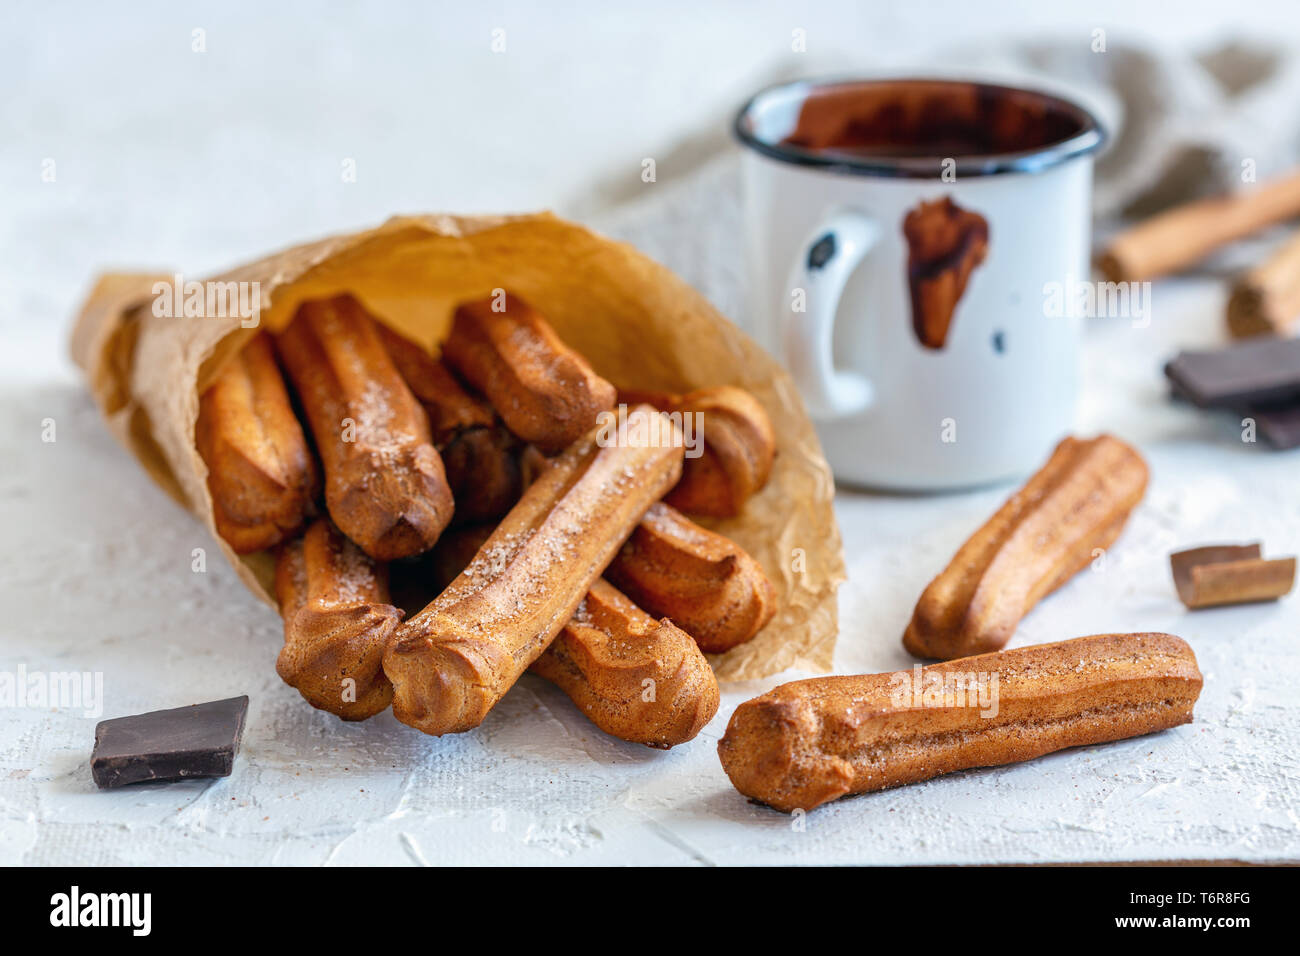 Churros with cinnamon and sugar in a paper bag. Stock Photo